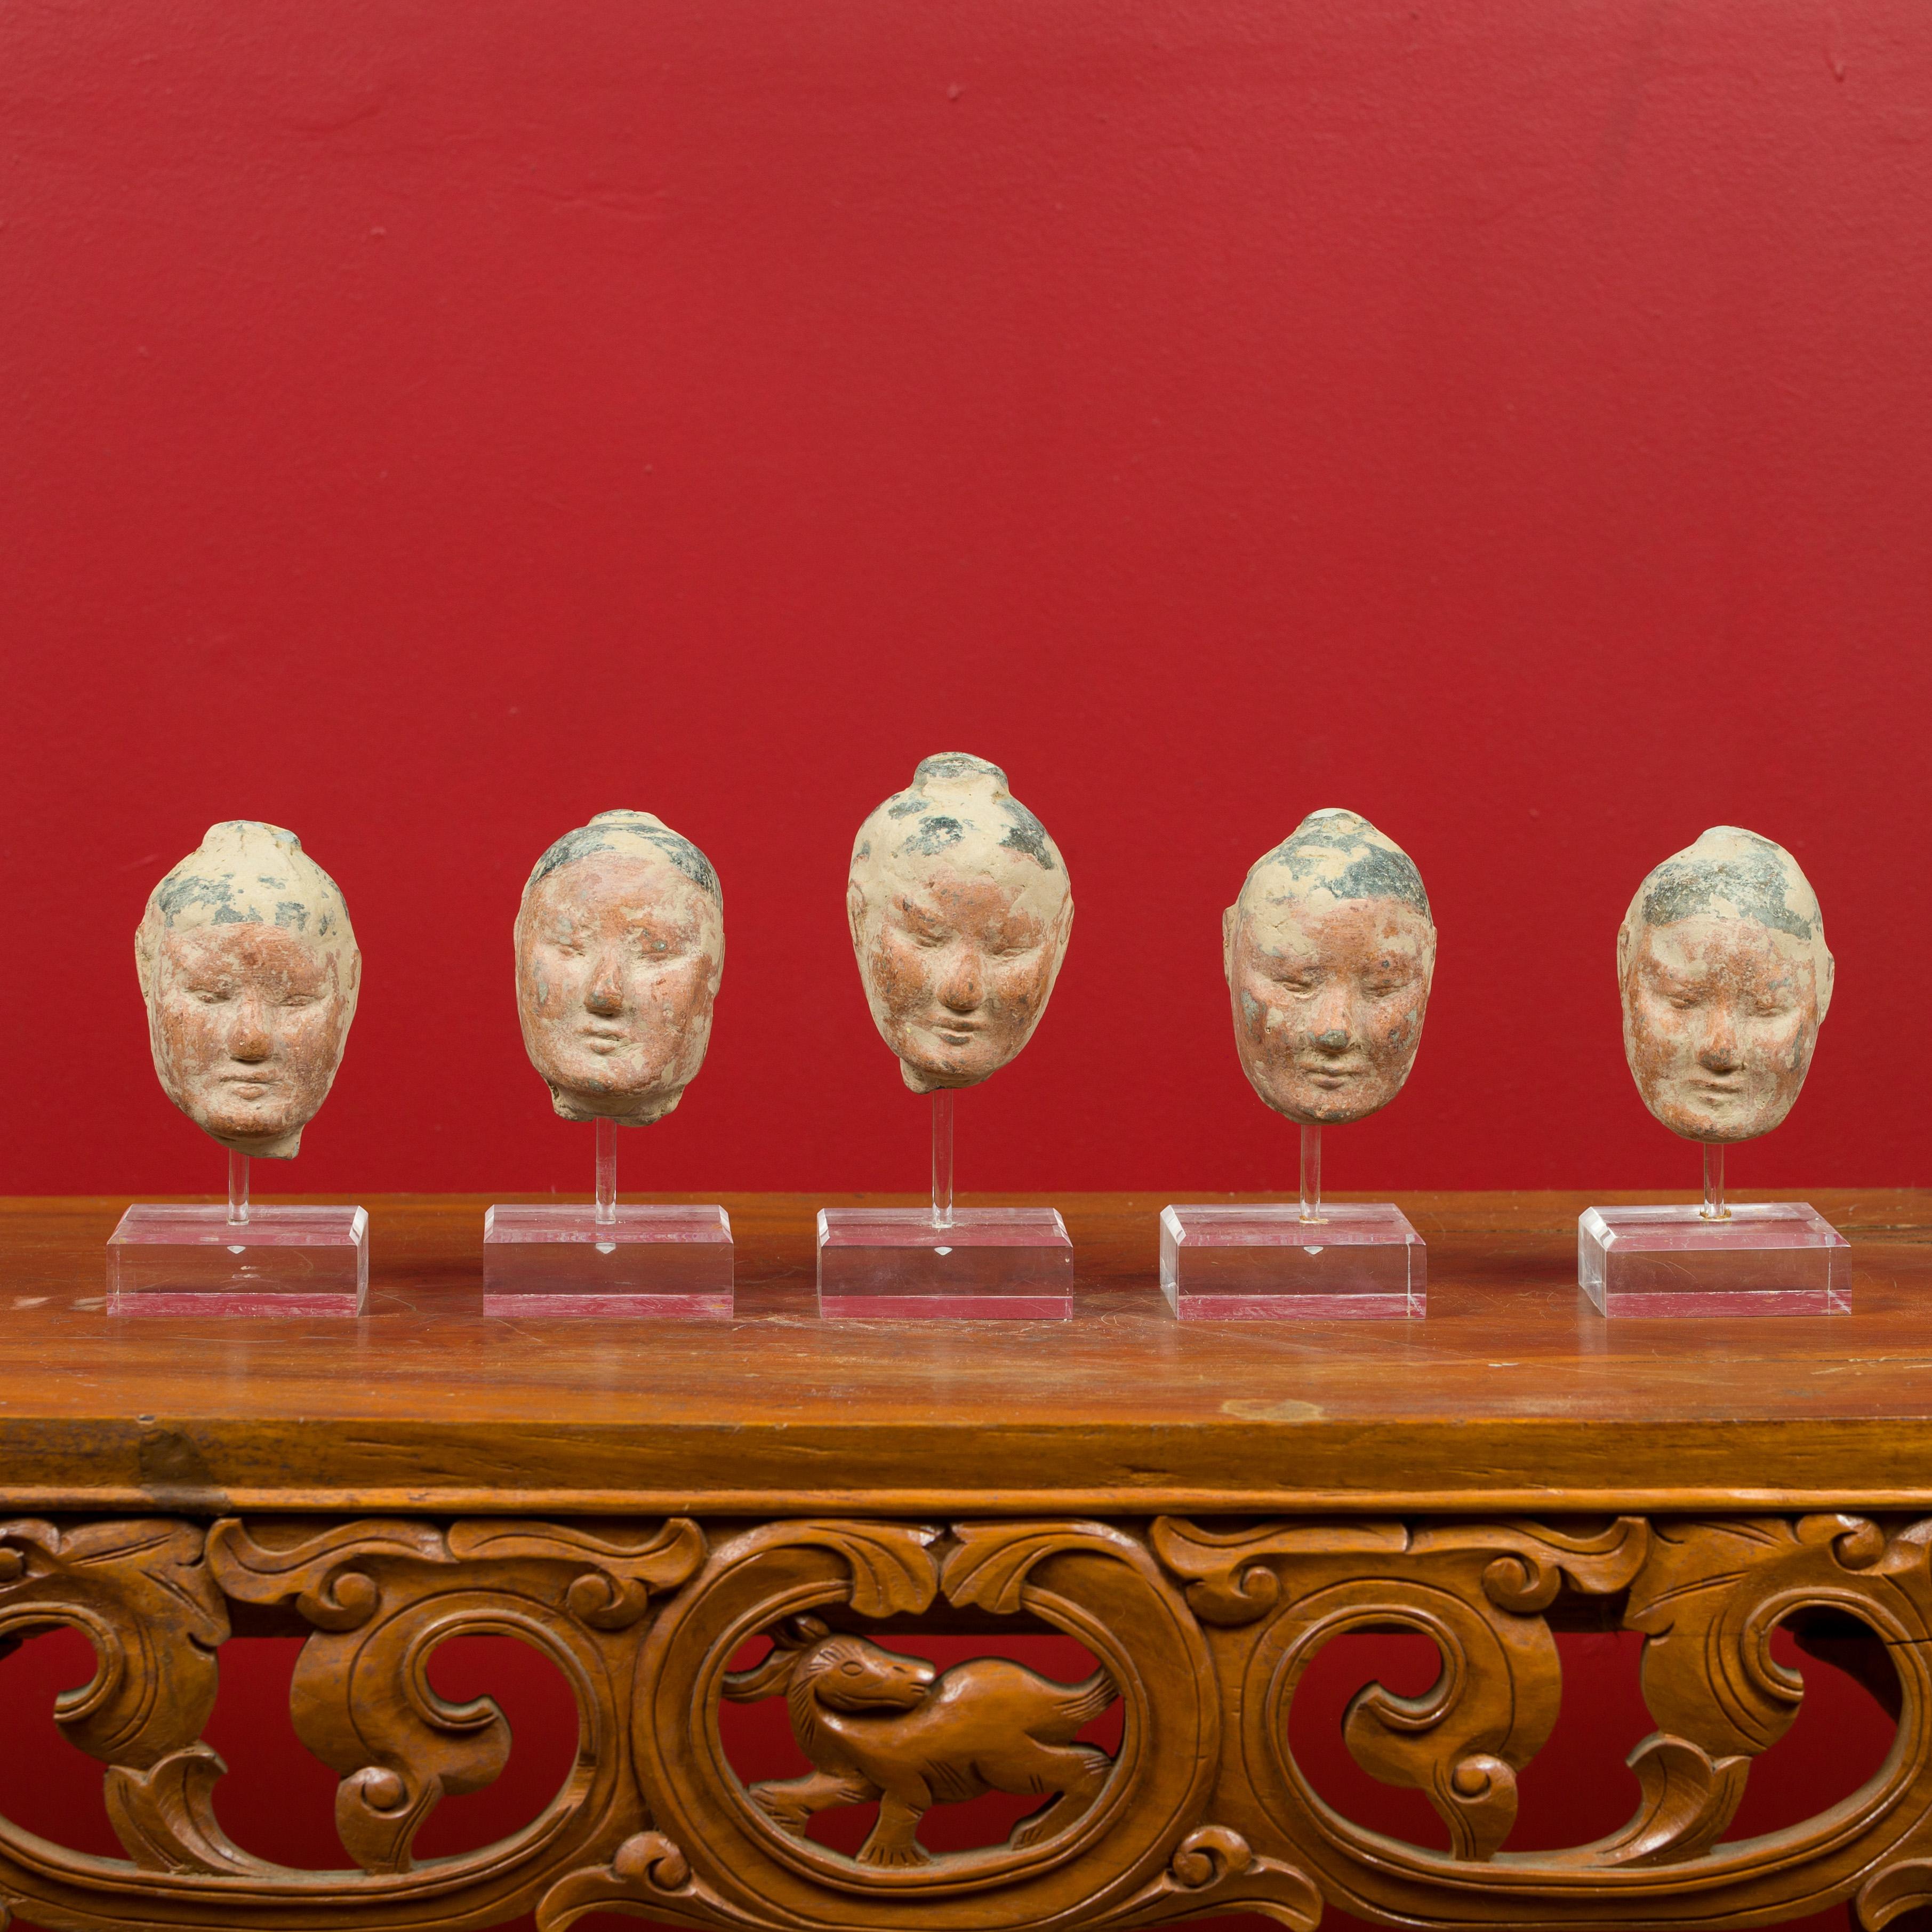 A set of five Chinese Han dynasty painted terracotta heads circa 202 BC-200 AD, all showing slight variations and mounted on custom made Lucite stands. The set is priced at $2,950, but we are also willing to sell them individually for $590 each.